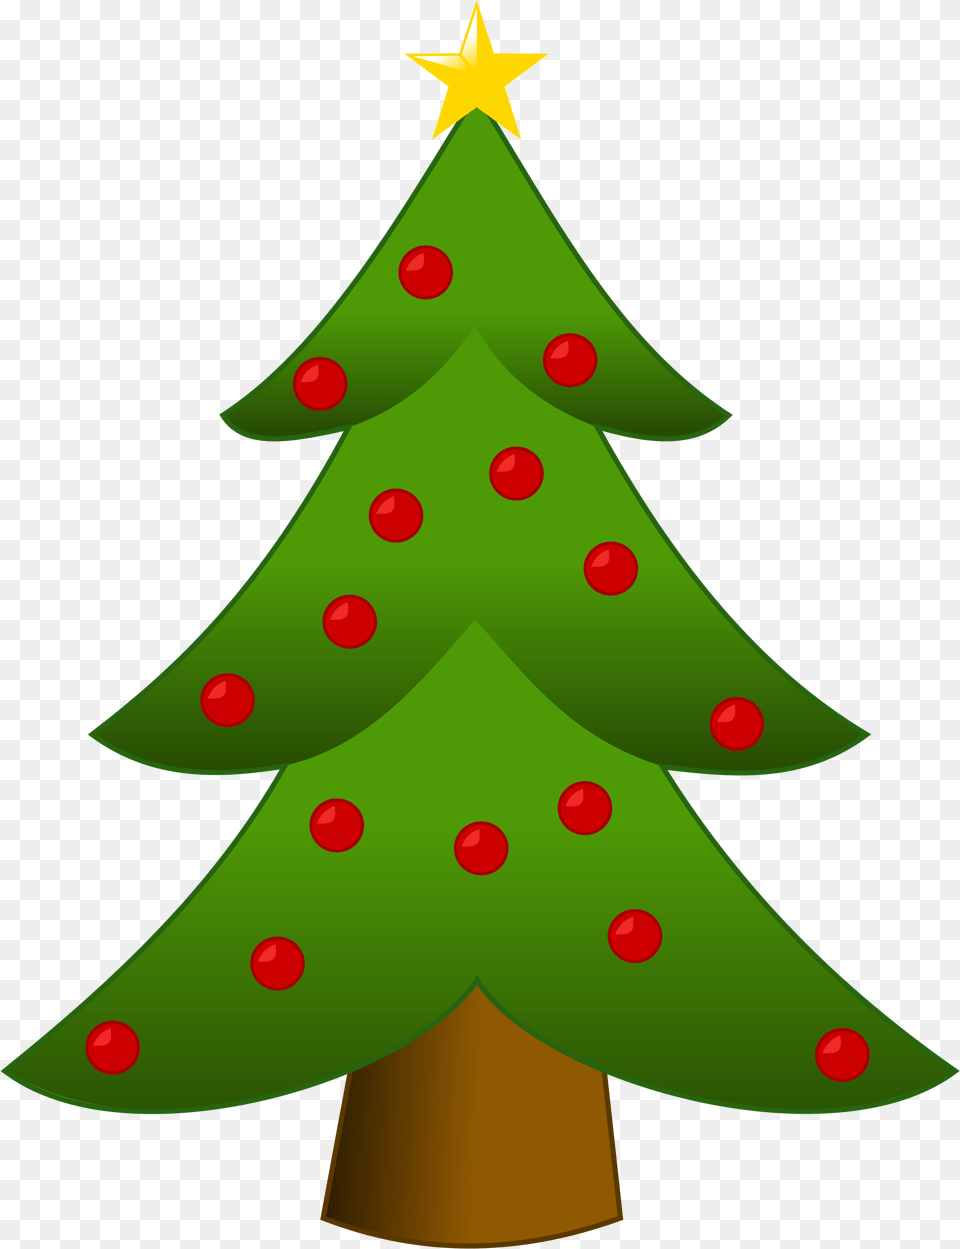 Christmas Tree Clipart 25 Clipart Simple Christmas Tree, Plant, Christmas Decorations, Festival, Shark Free Transparent Png